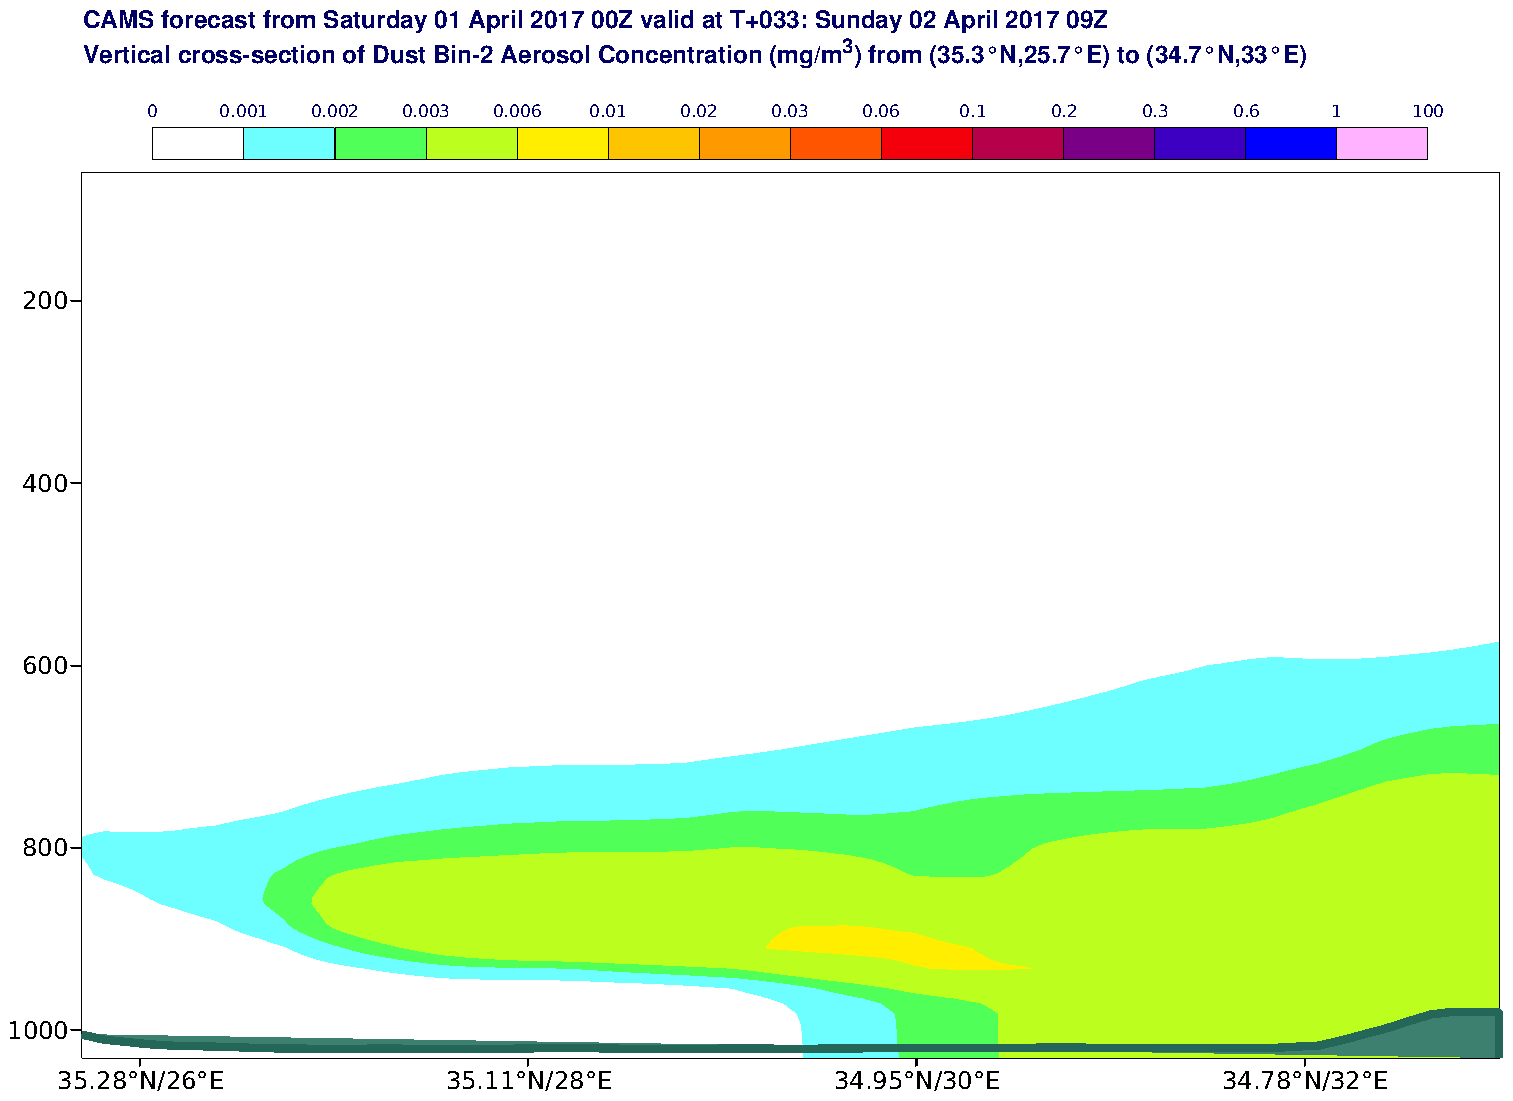 Vertical cross-section of Dust Bin-2 Aerosol Concentration (mg/m3) valid at T33 - 2017-04-02 09:00